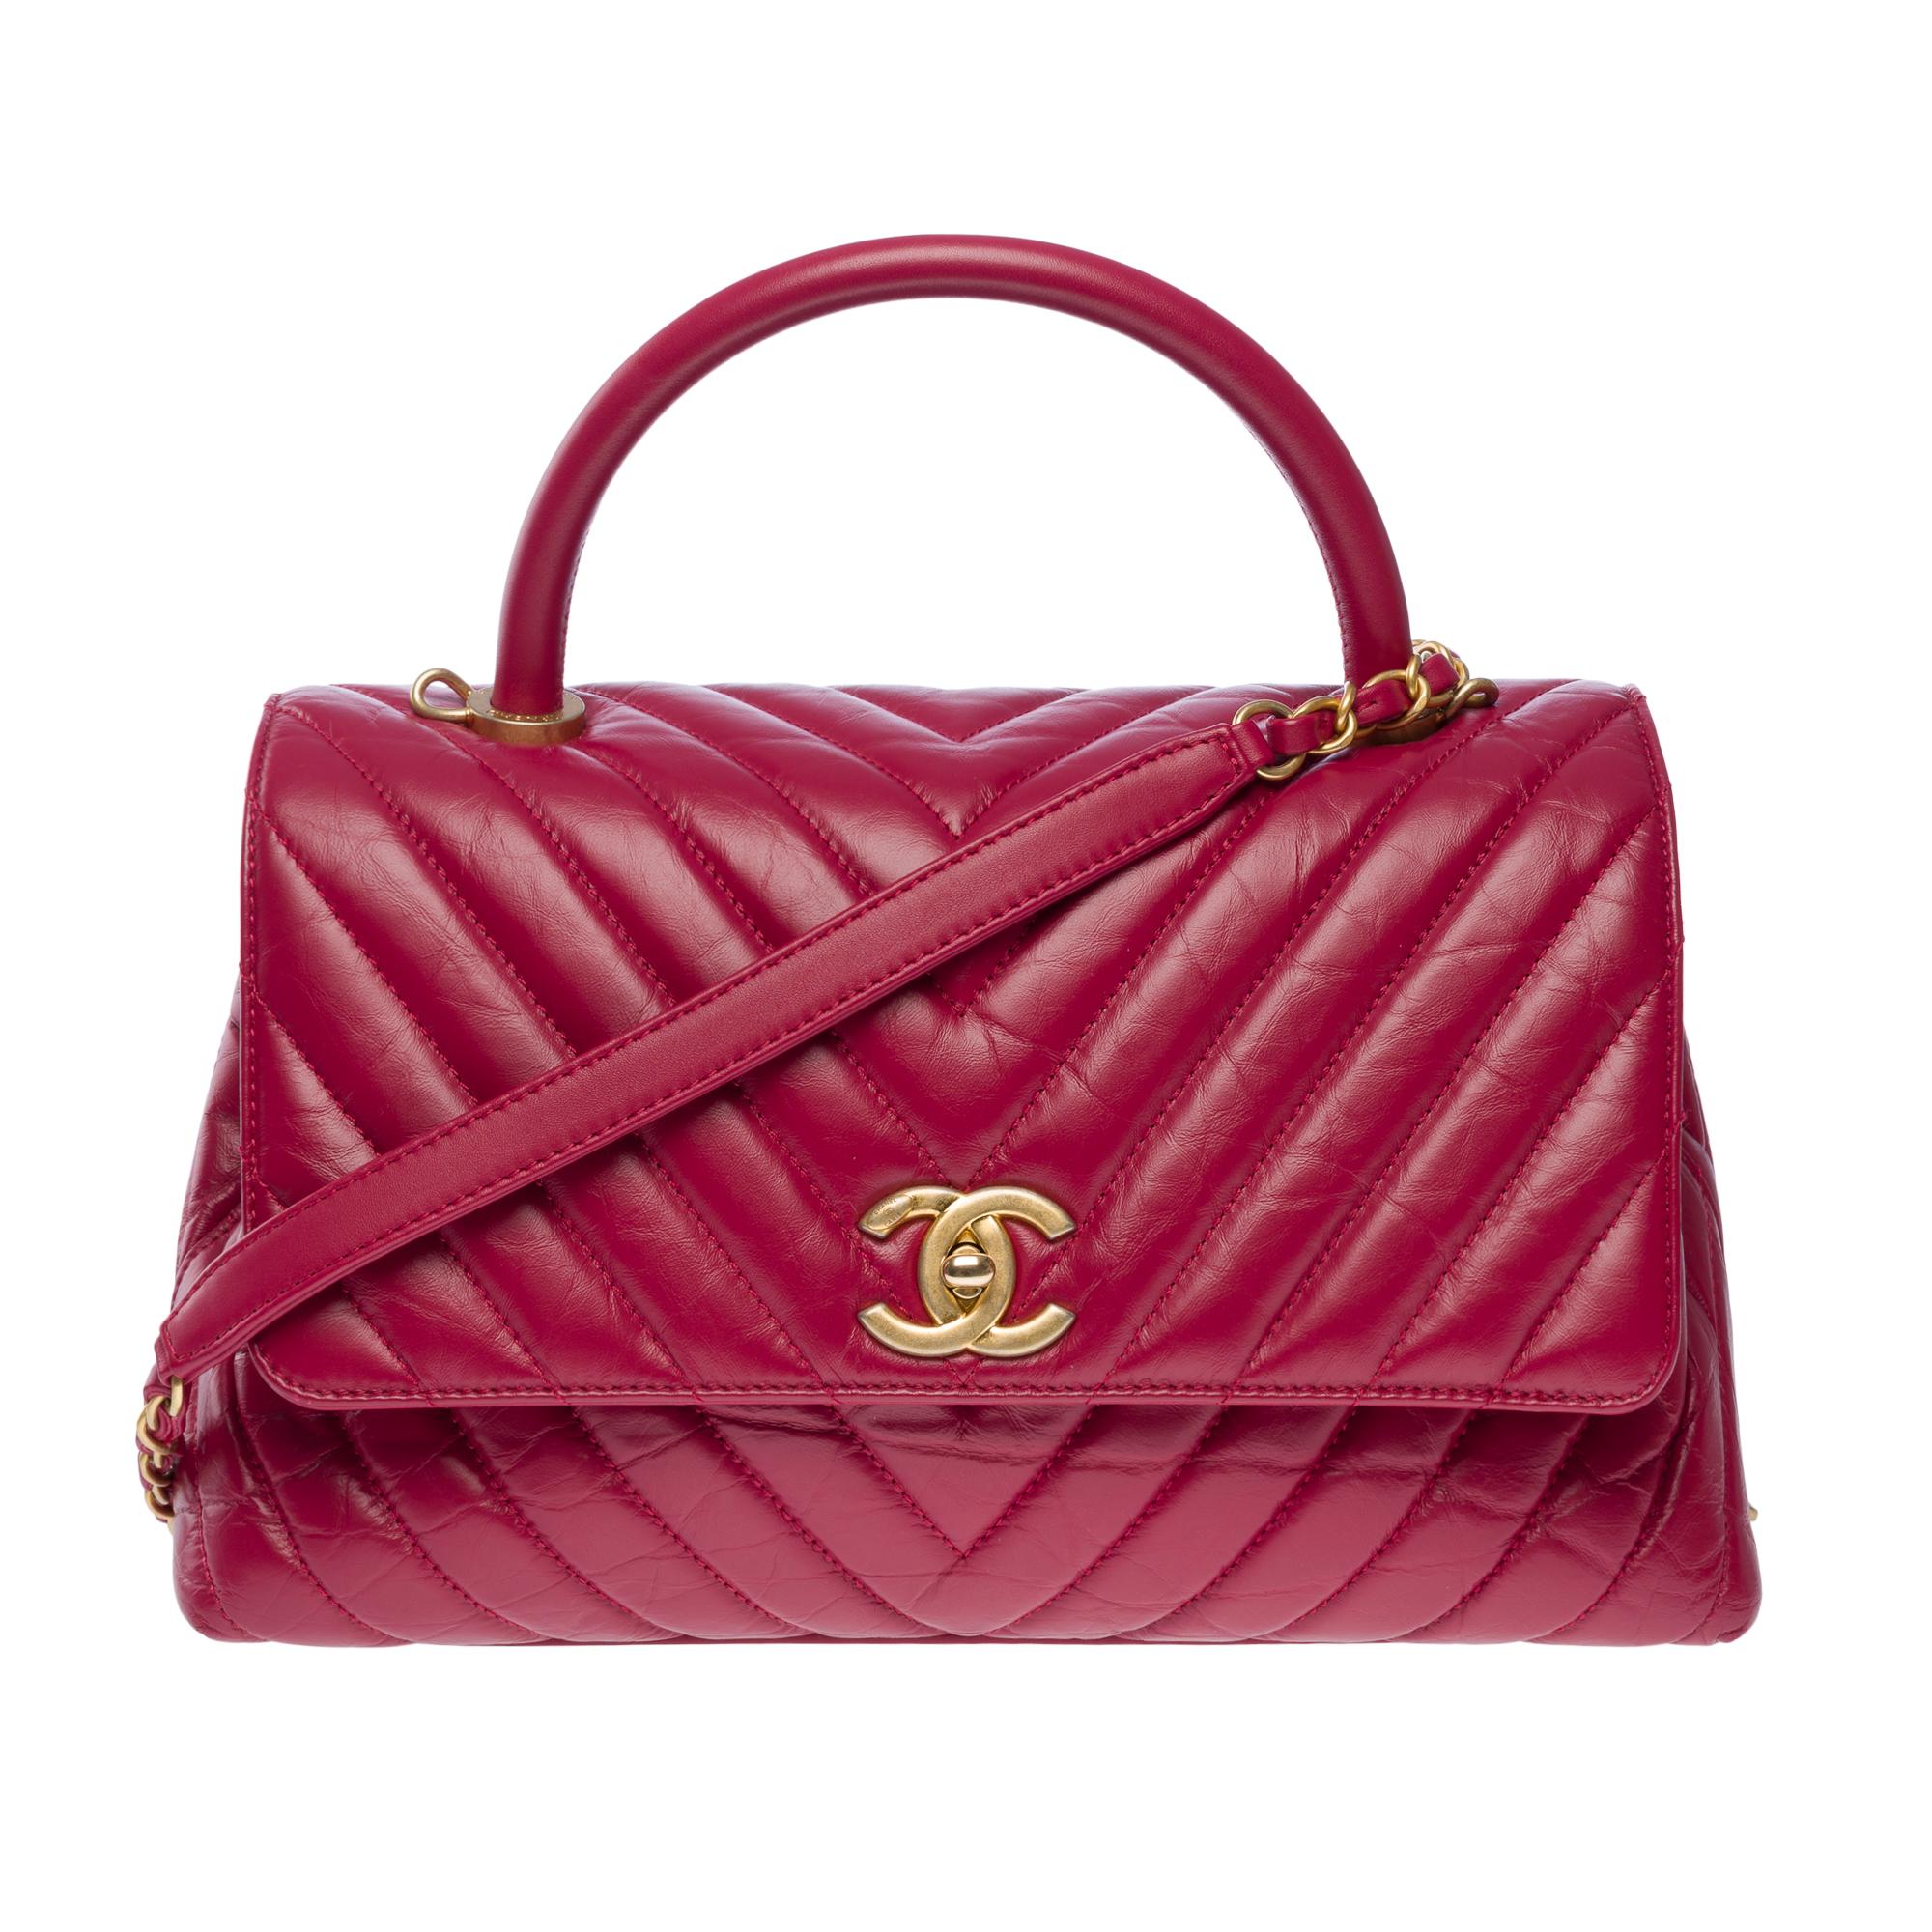 Amazing Chanel Coco handle bag flap bag in red quilted lambskin leather with herringbone, matte gold metal hardware , a matte gold metal chain handle interlaced with red leather, a simple red leather handle for hand or shoulder or crossbody